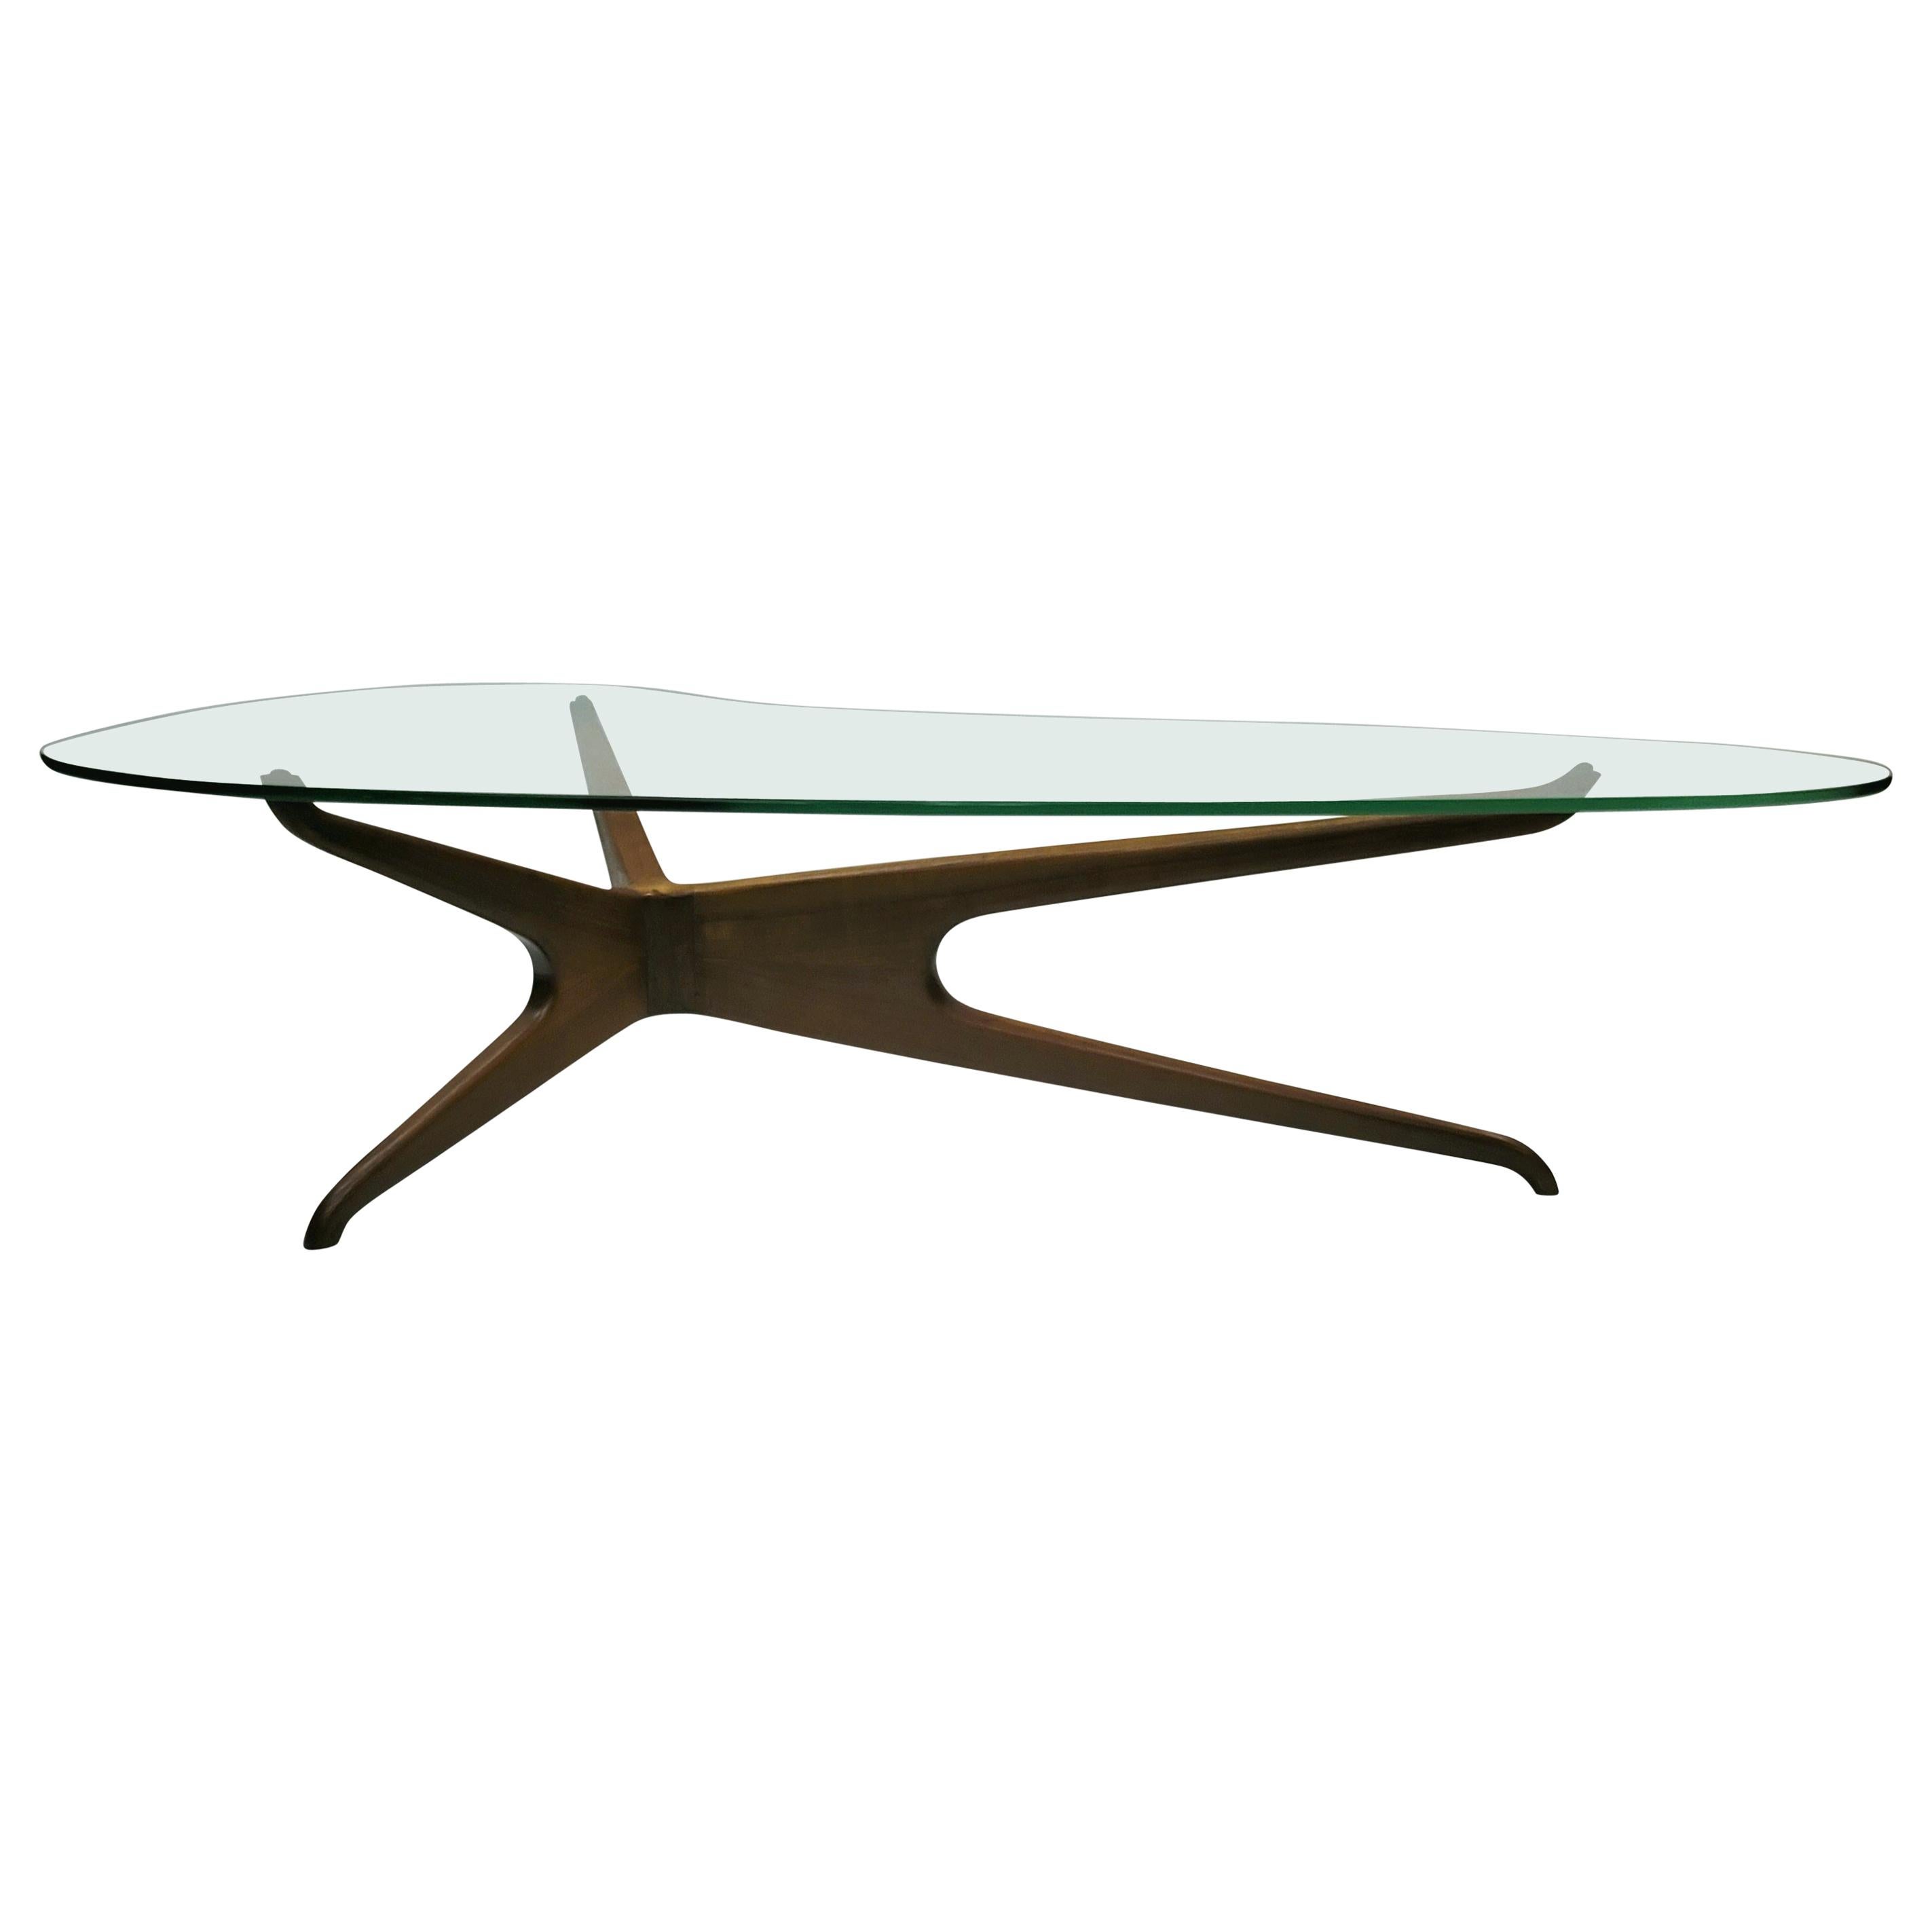 Wood and Glass Trisymmetric Coffee Table